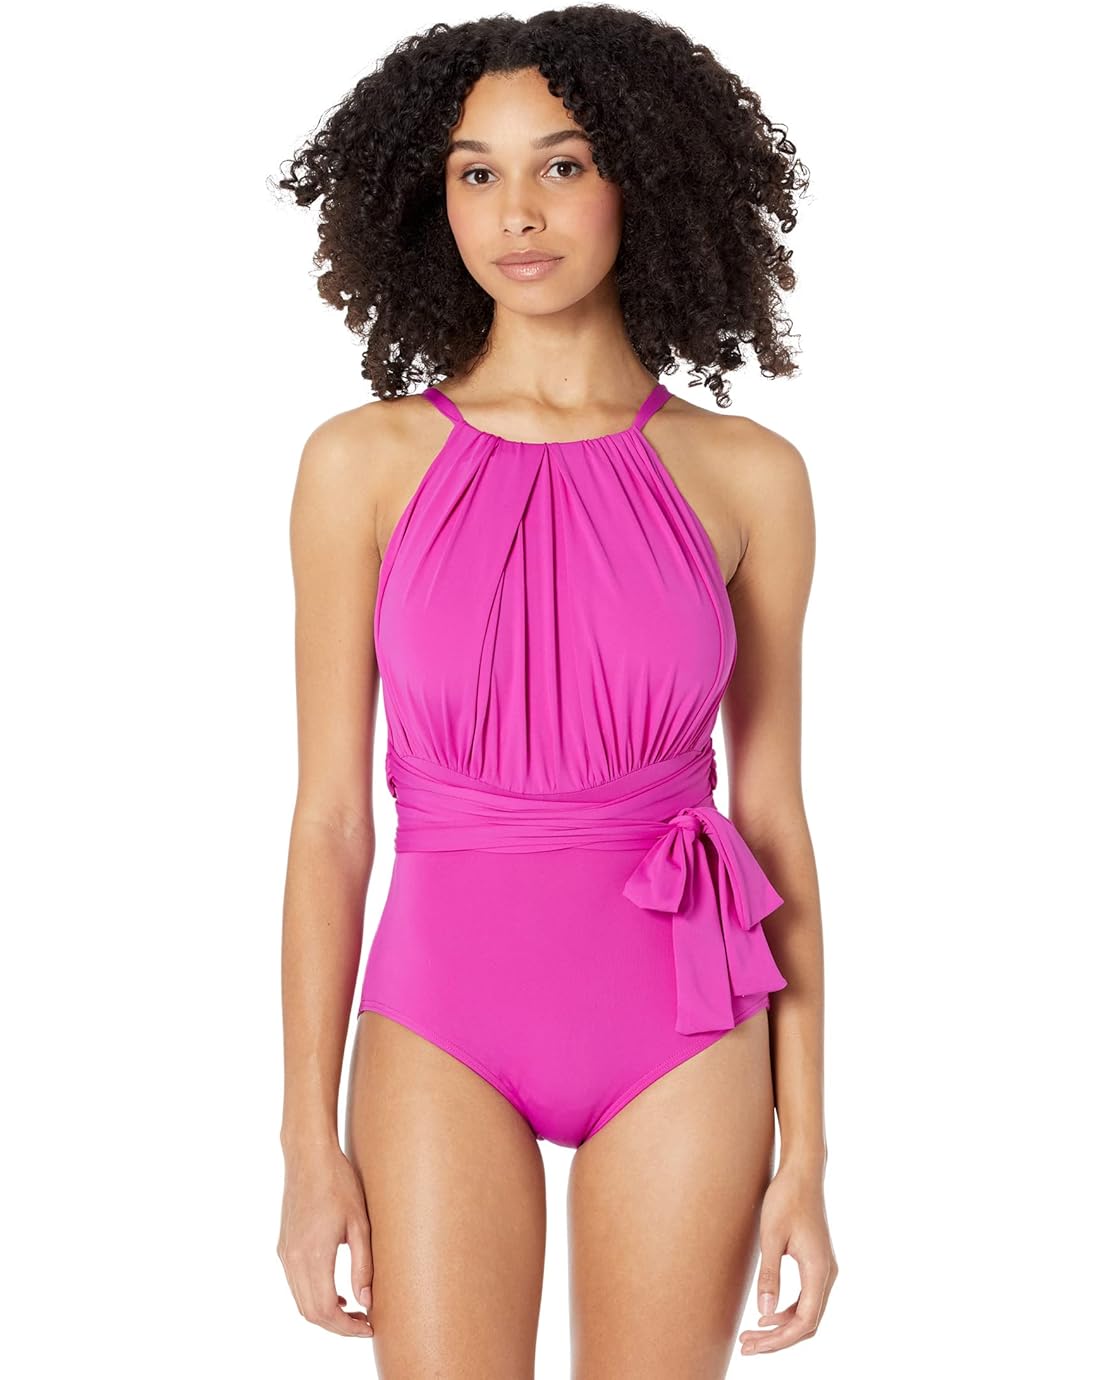 COCO REEF Keepsake Iconic Belted High Neck One-Piece